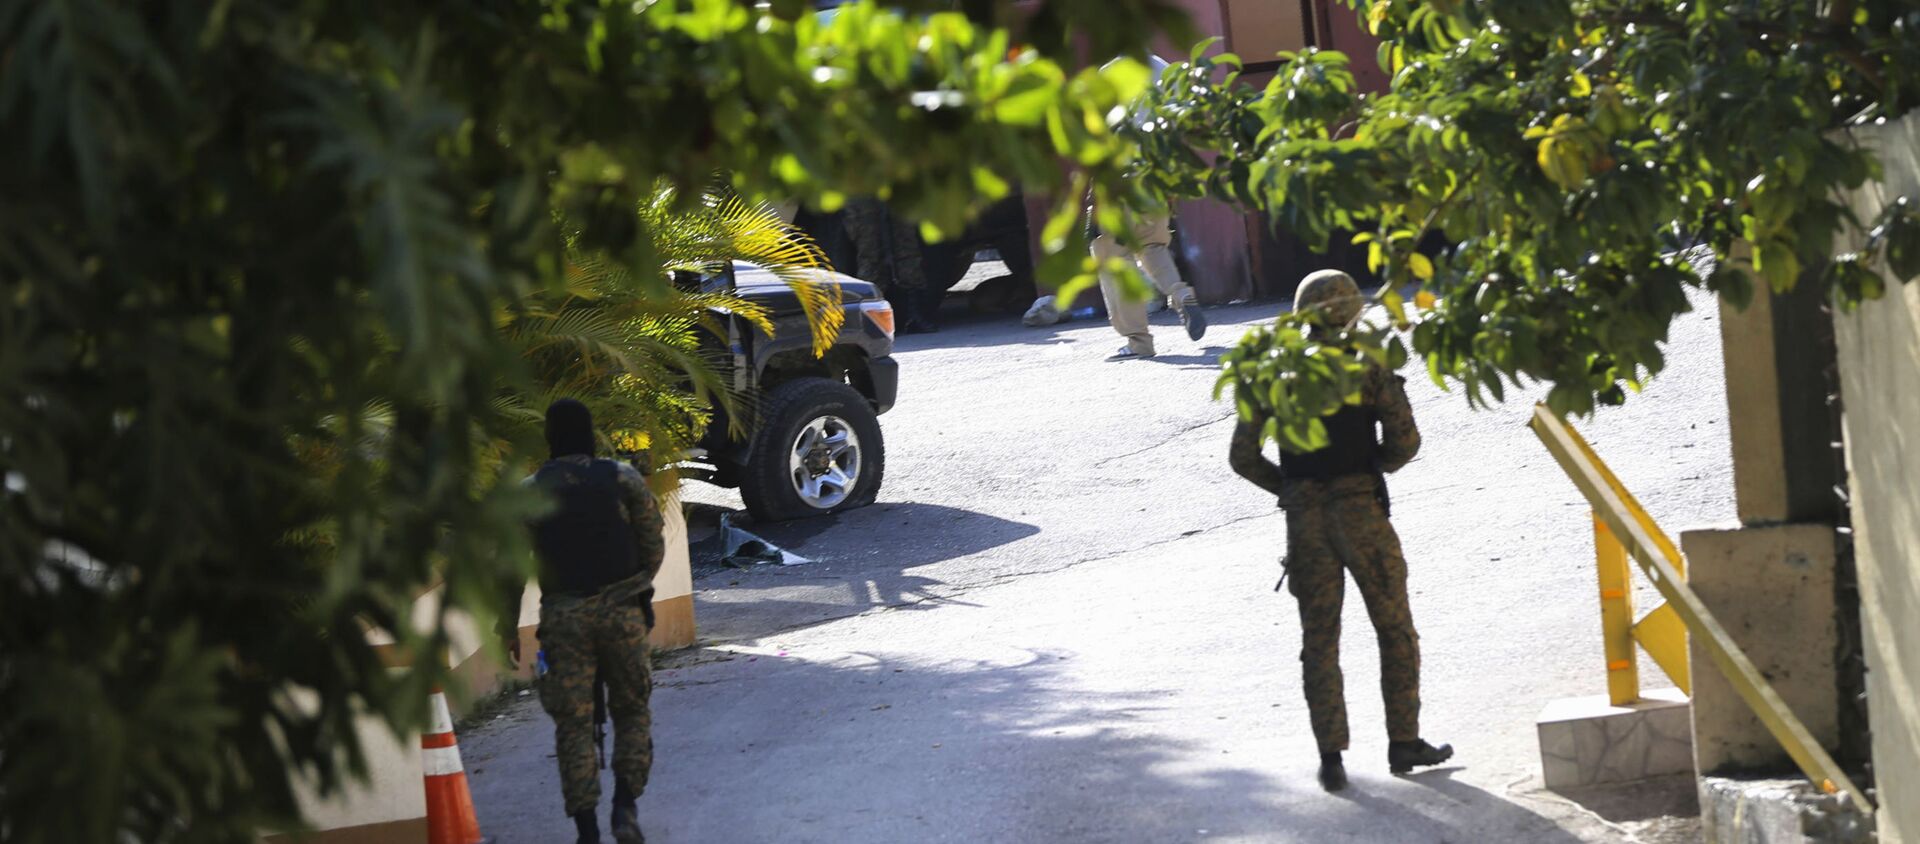 Soldiers stand guard at the entrance to the house of late Haitian President Jovenel Moise in Port-au-Prince, Haiti, Wednesday, July 7, 2021. Moïse was assassinated in an attack on his private residence early Wednesday, and first lady Martine Moïse was shot in the overnight attack and hospitalized, according to a statement from the country’s interim prime minister. (AP Photo/Joseph Odelyn) - 俄罗斯卫星通讯社, 1920, 19.10.2021